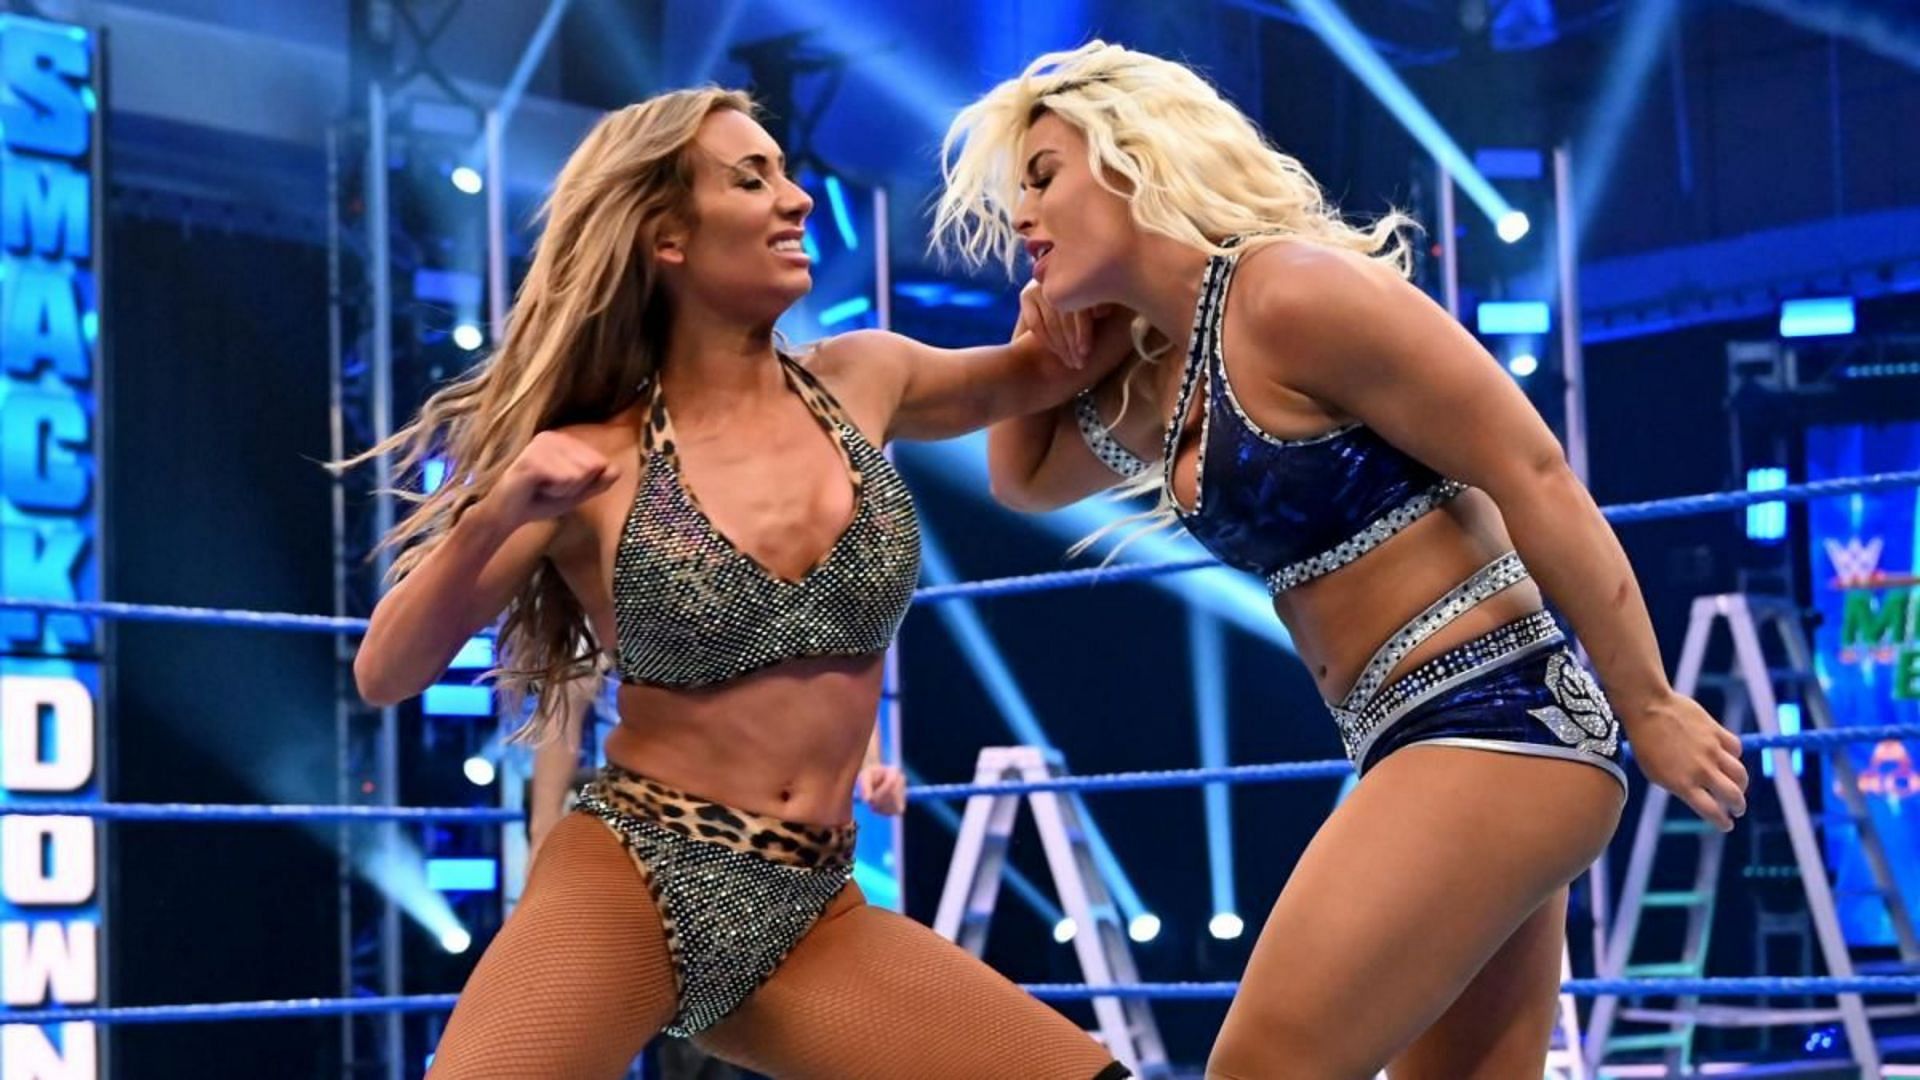 Carmella called Mandy Rose out for being unsafe in the ring